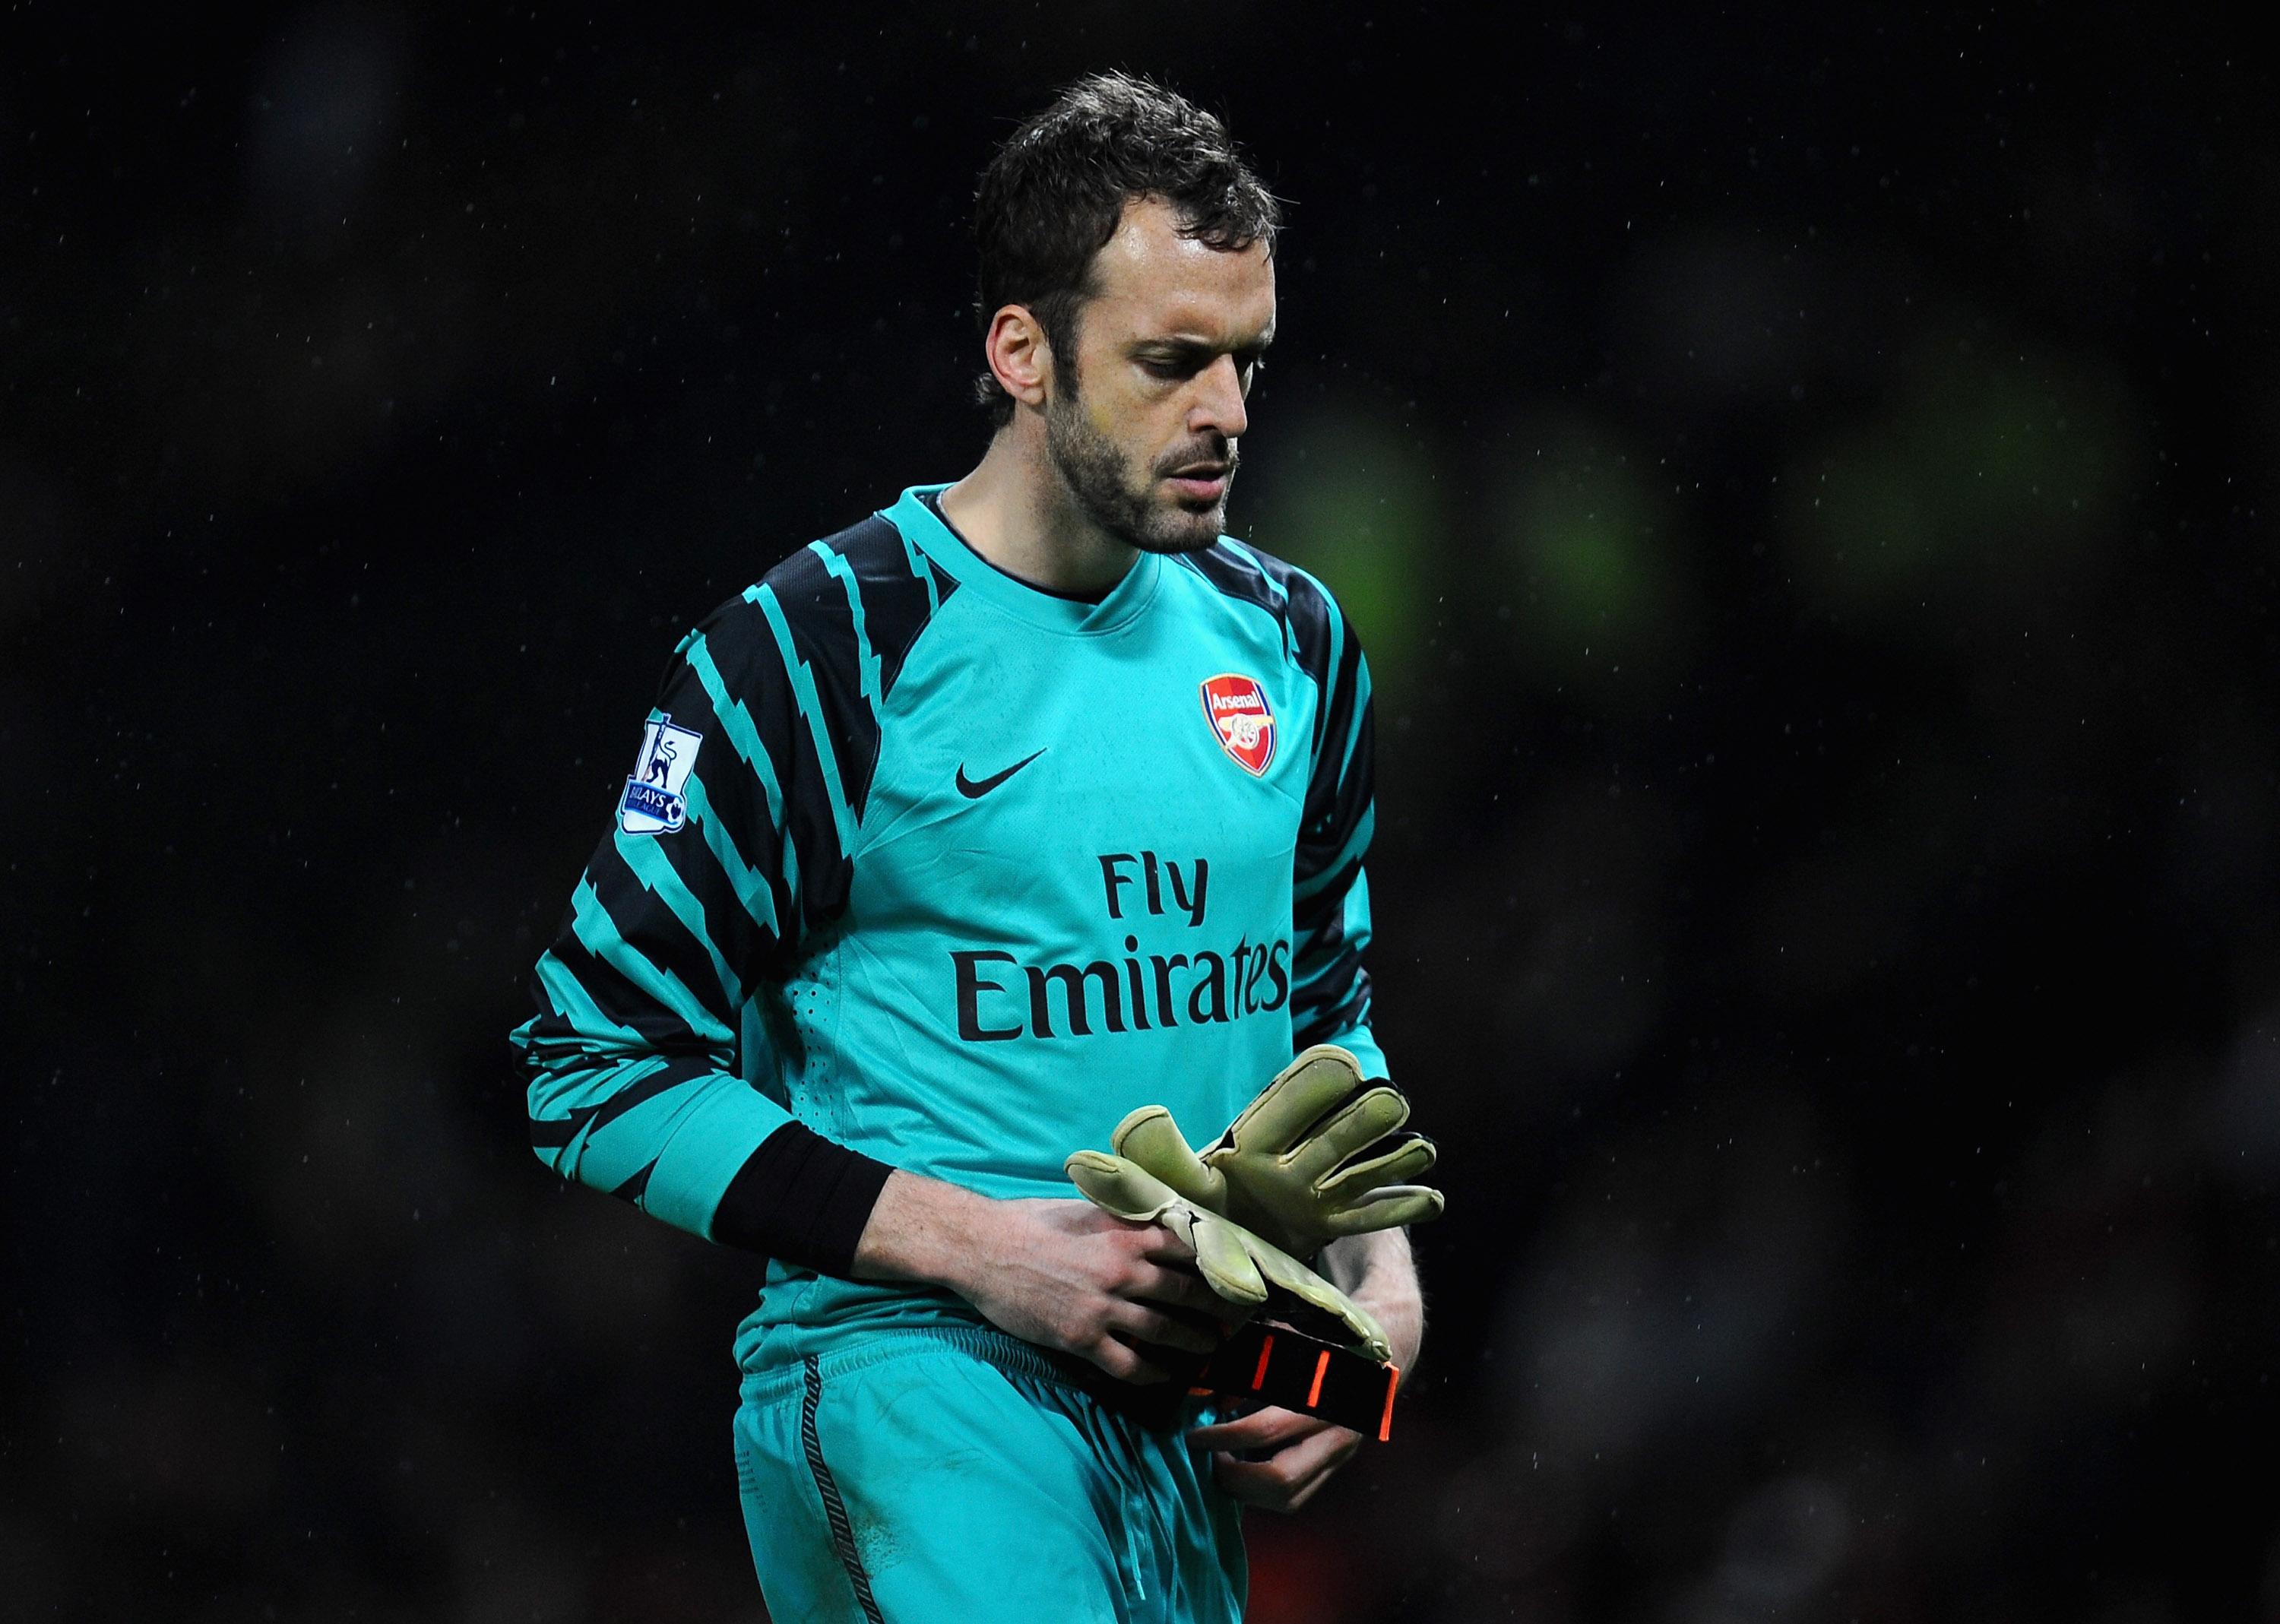 MANCHESTER, ENGLAND - MARCH 12:  Manuel Almunia of Arsenal looks dejected after defeat in the FA Cup sponsored by E.On Sixth Round match between Manchester United and Arsenal at Old Trafford on March 12, 2011 in Manchester, England.  (Photo by Clive Mason